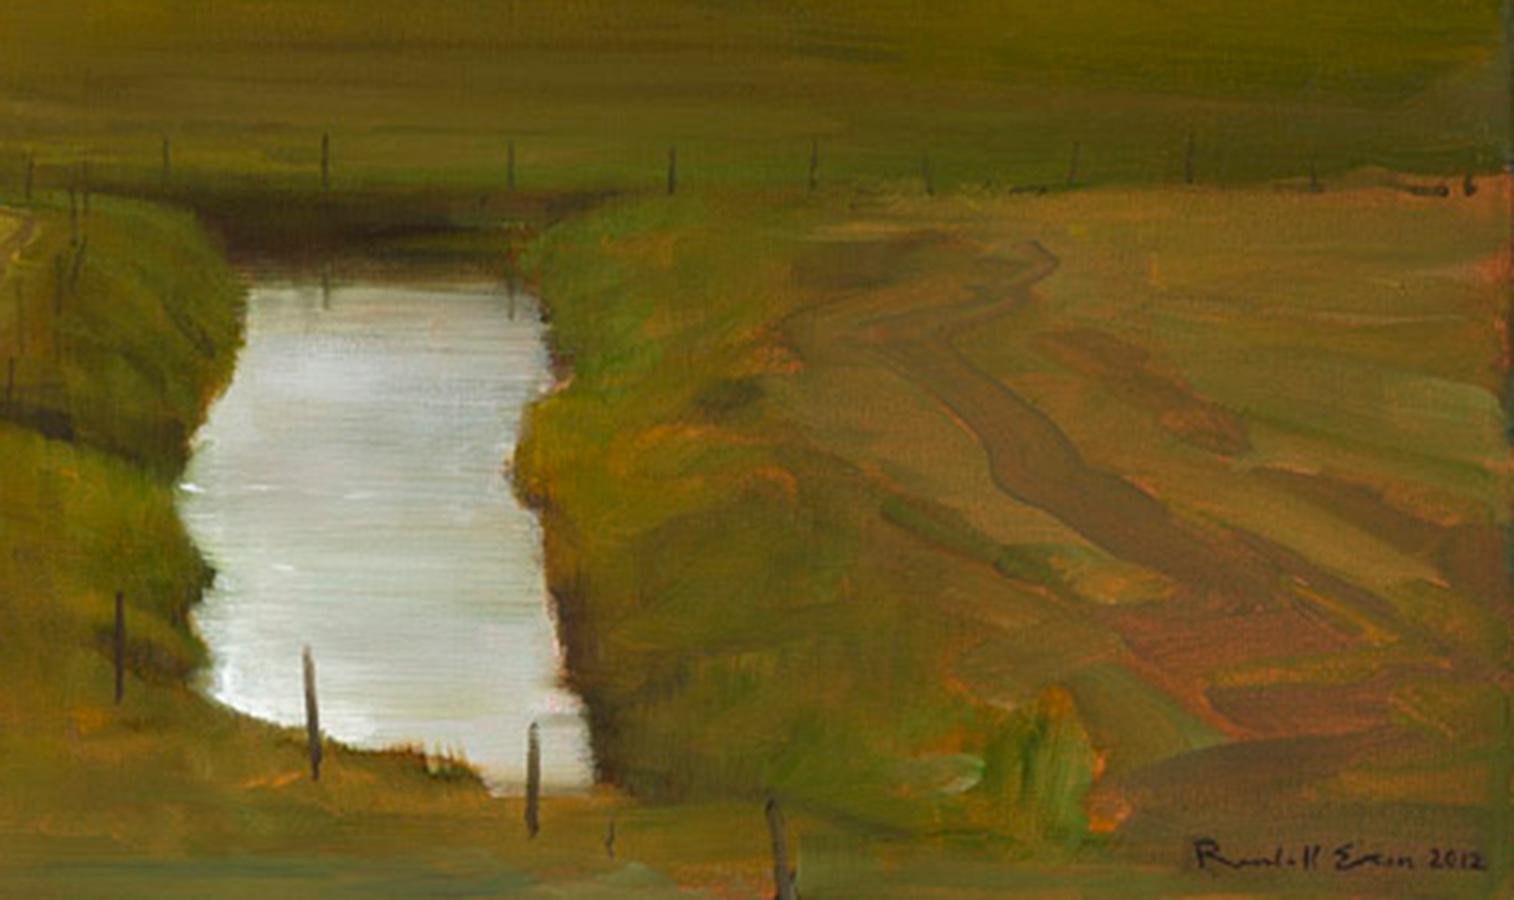 The Bottom of the River  - Painting by Randall Exon